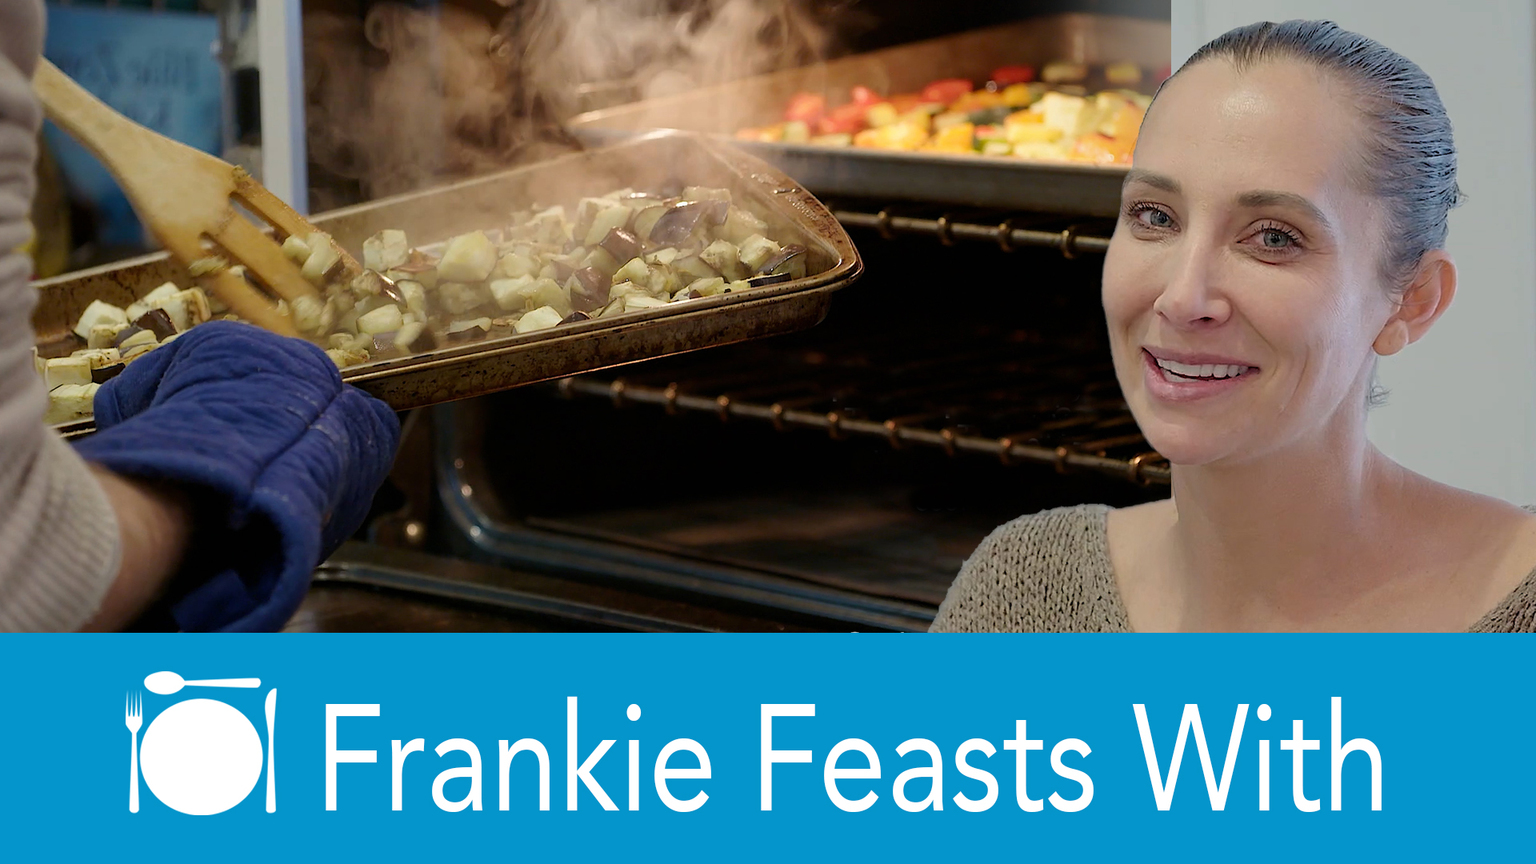 Frankie Feasts With...